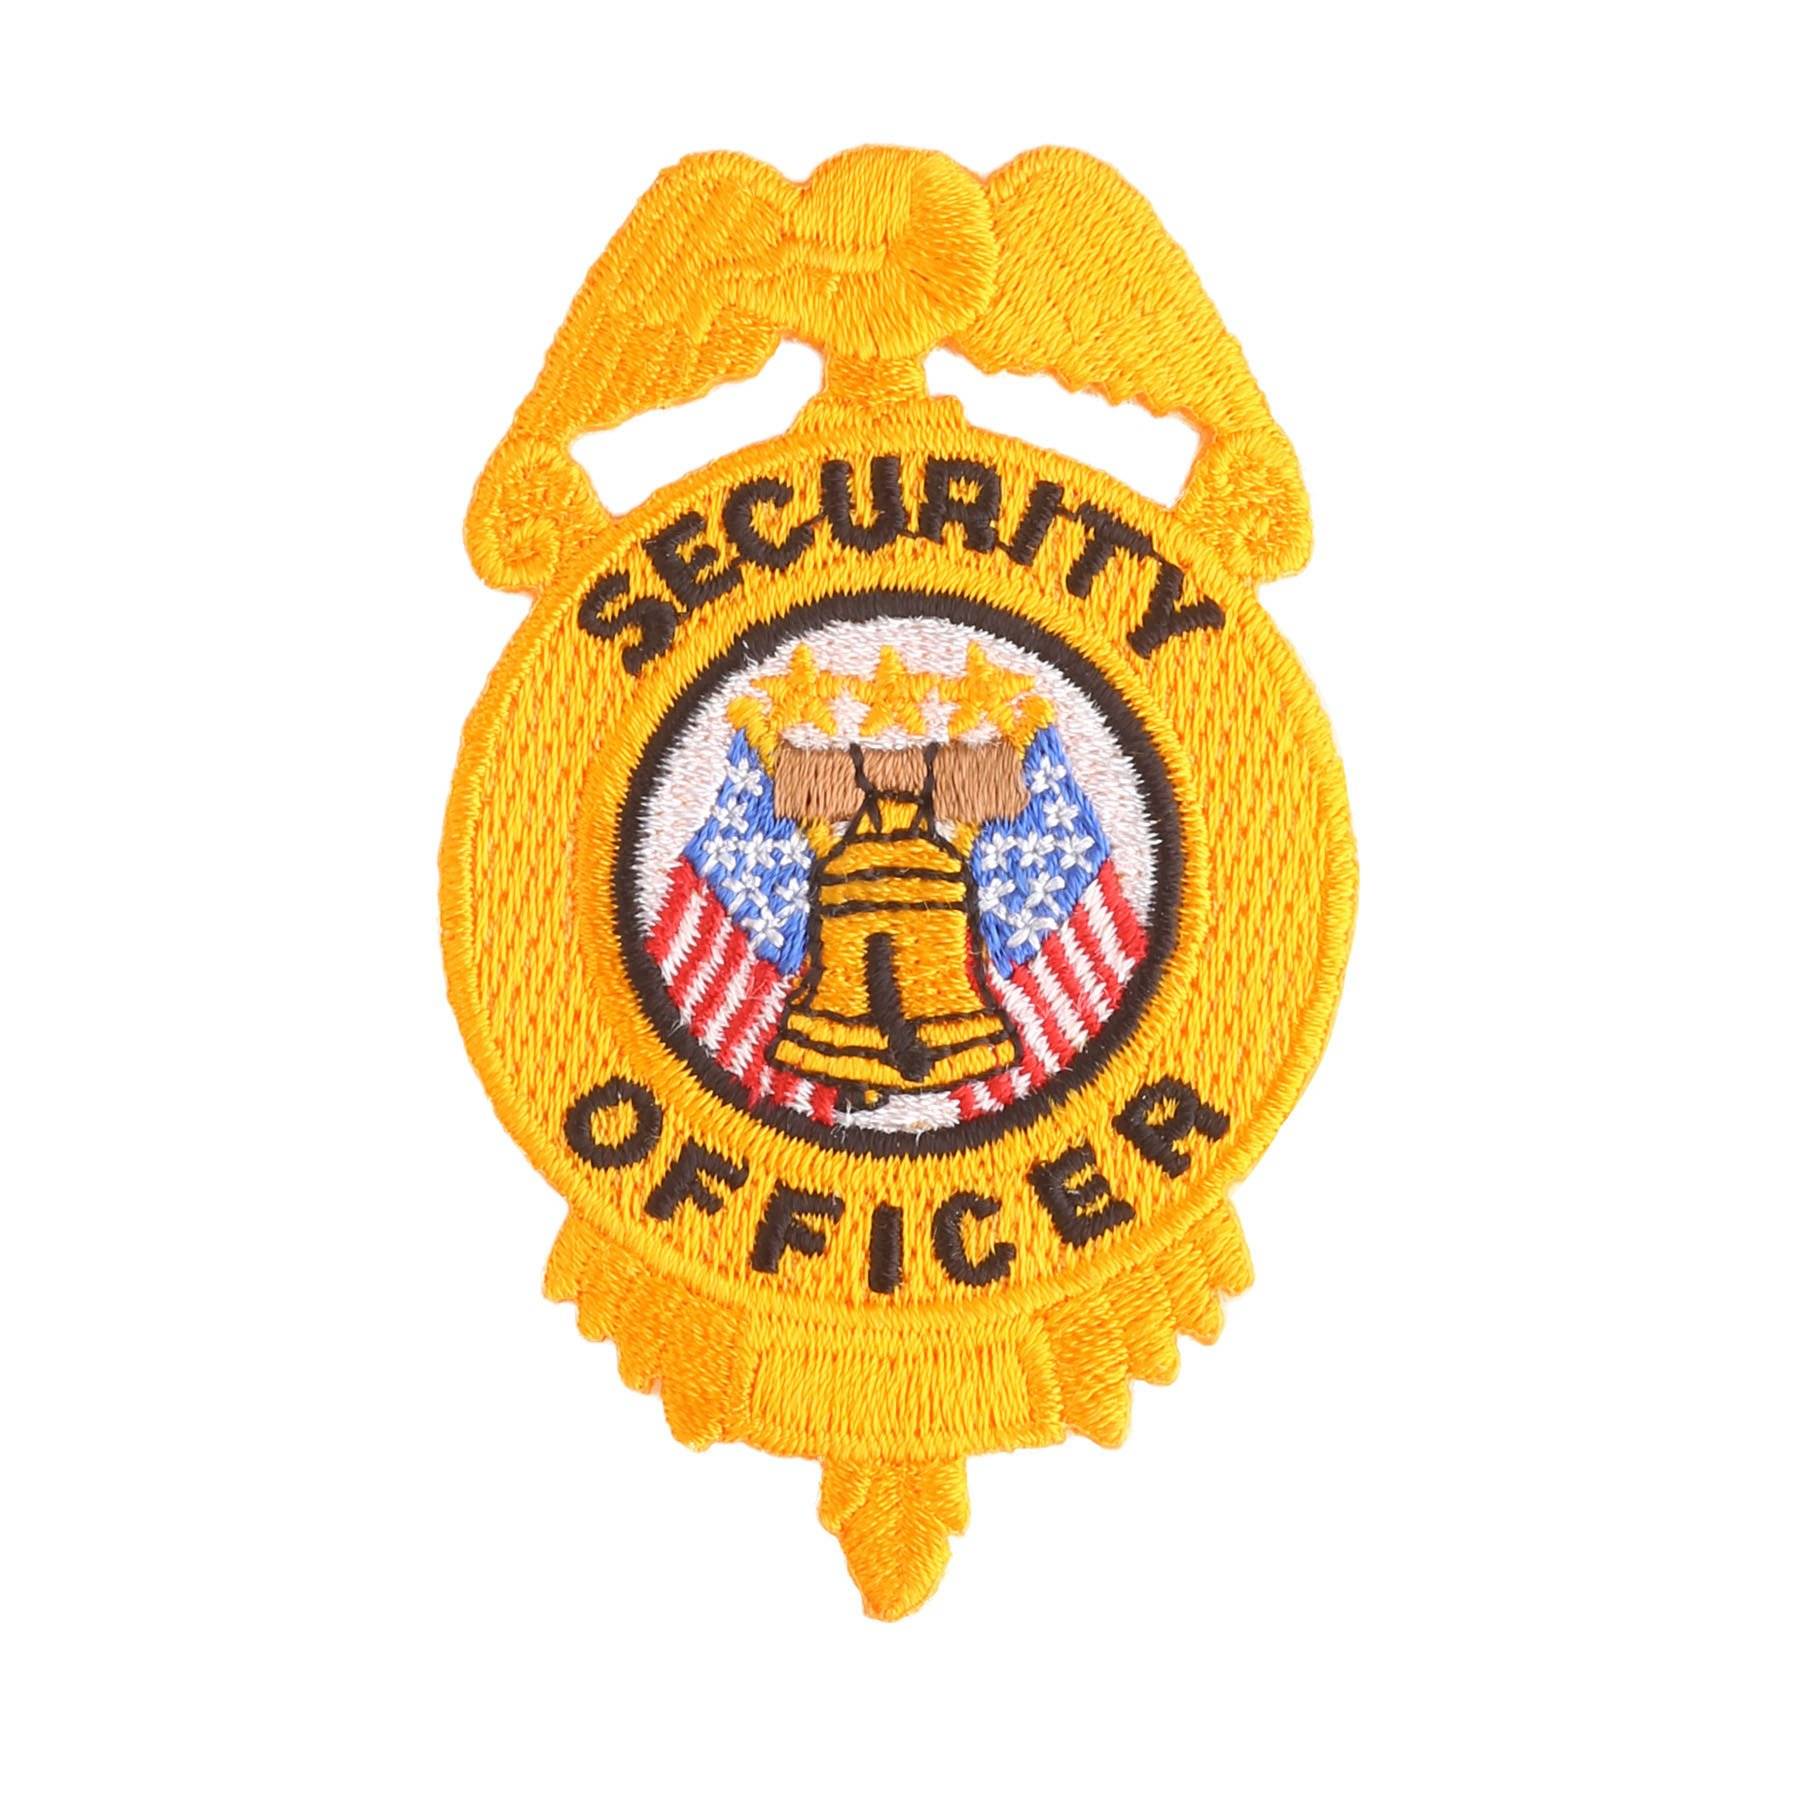 Gold Outline Jacket Shirt Private Security Officer Shoulder Patch with Eagle 